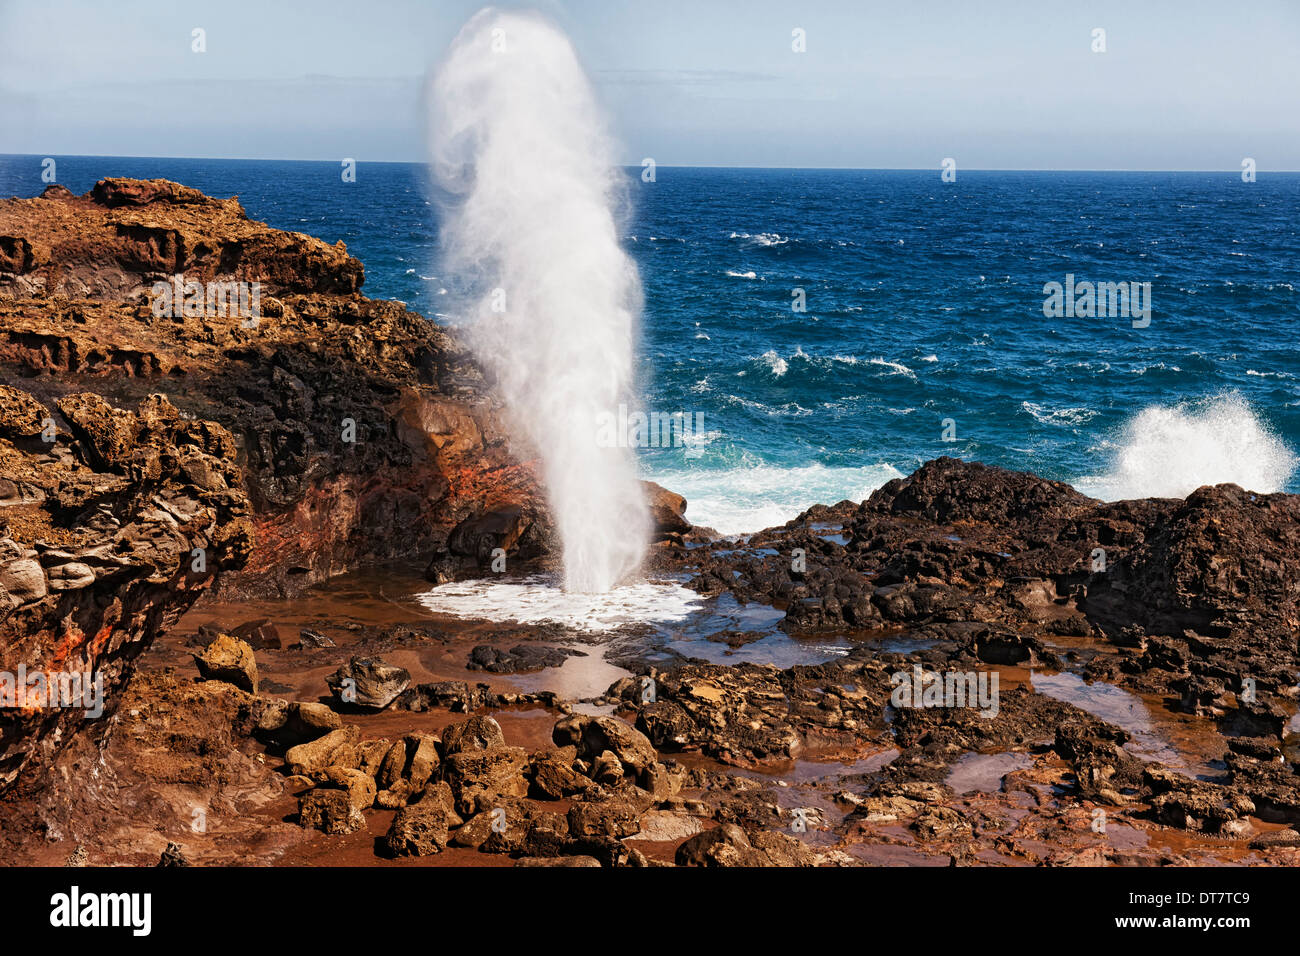 The Pacific Ocean erupts out of the volcanic formed Nakalele Blowhole on Hawaii’s island of Maui. Stock Photo